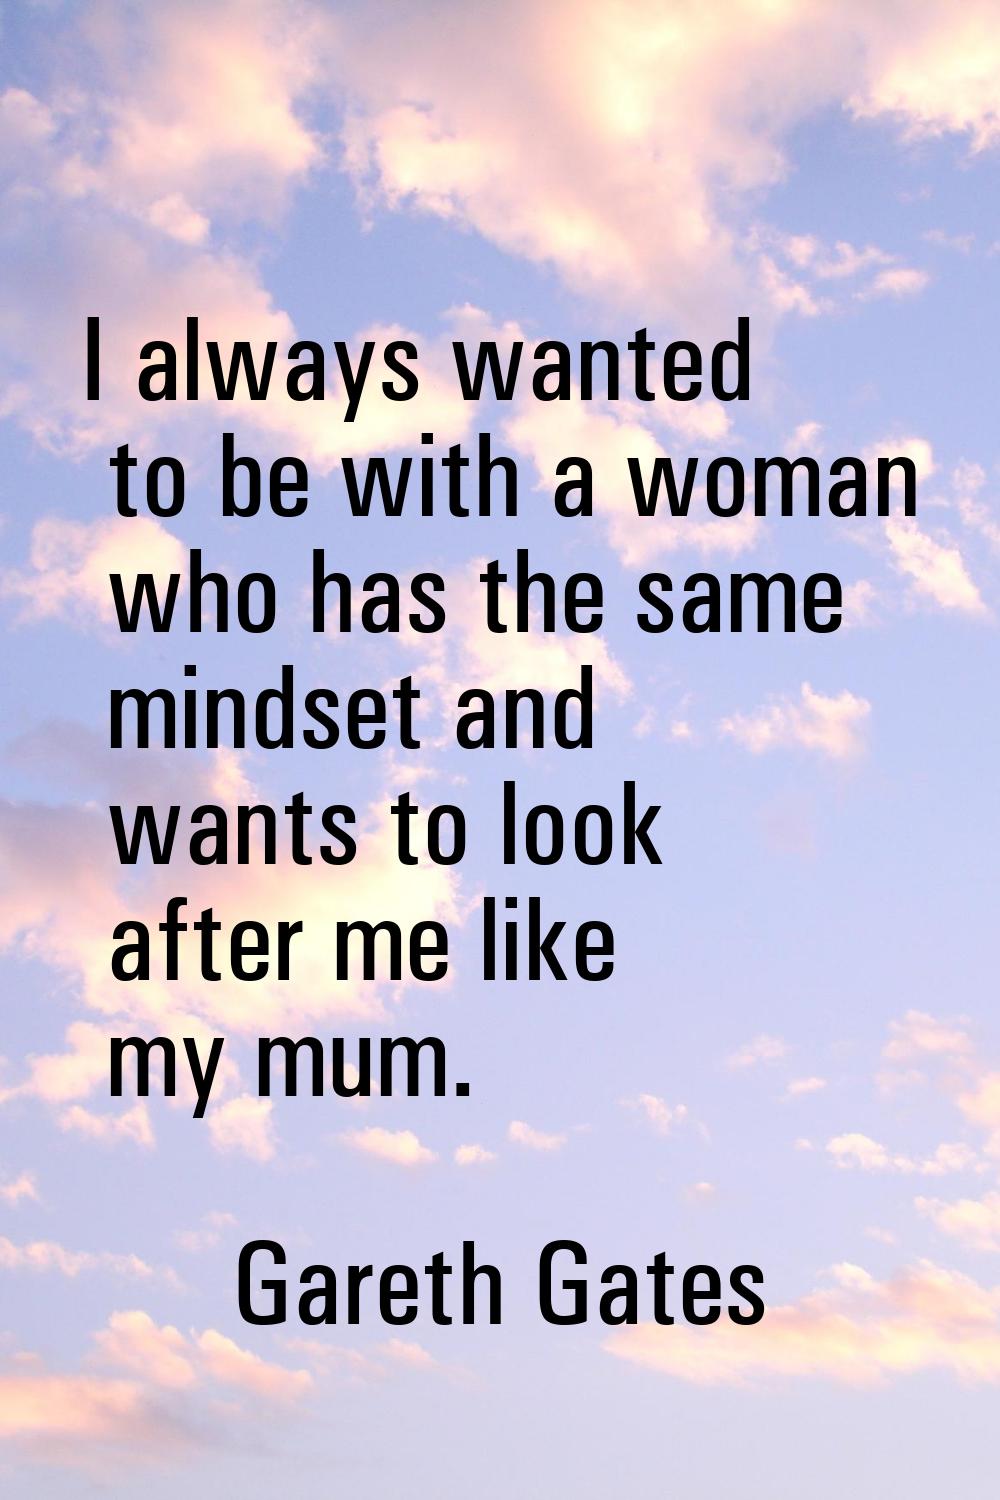 I always wanted to be with a woman who has the same mindset and wants to look after me like my mum.